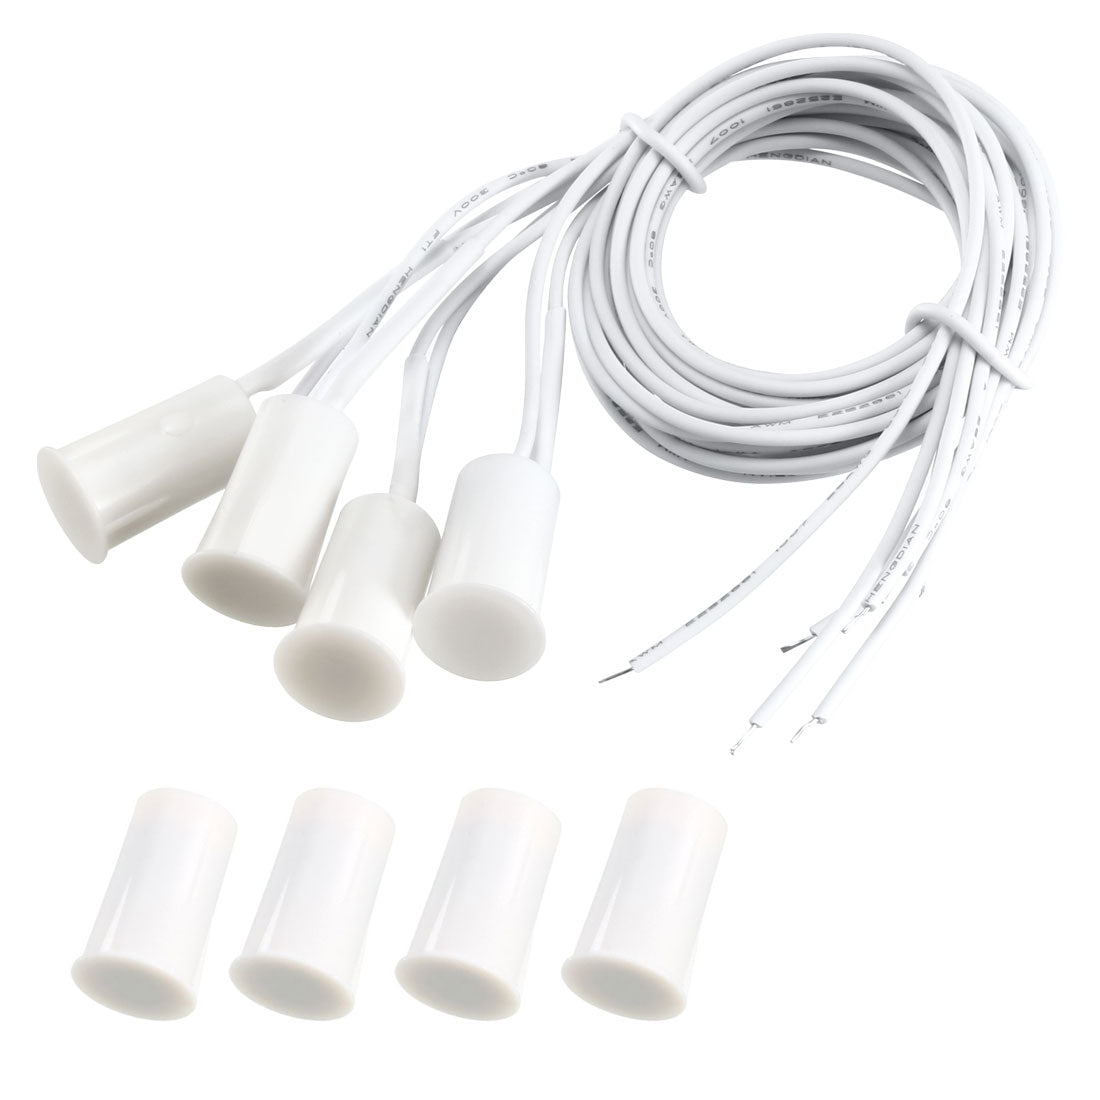 uxcell Uxcell 4pcs RC-33 NO Recessed Wired Security Window Door Contact Sensor Alarm Magnetic Reed Switch White